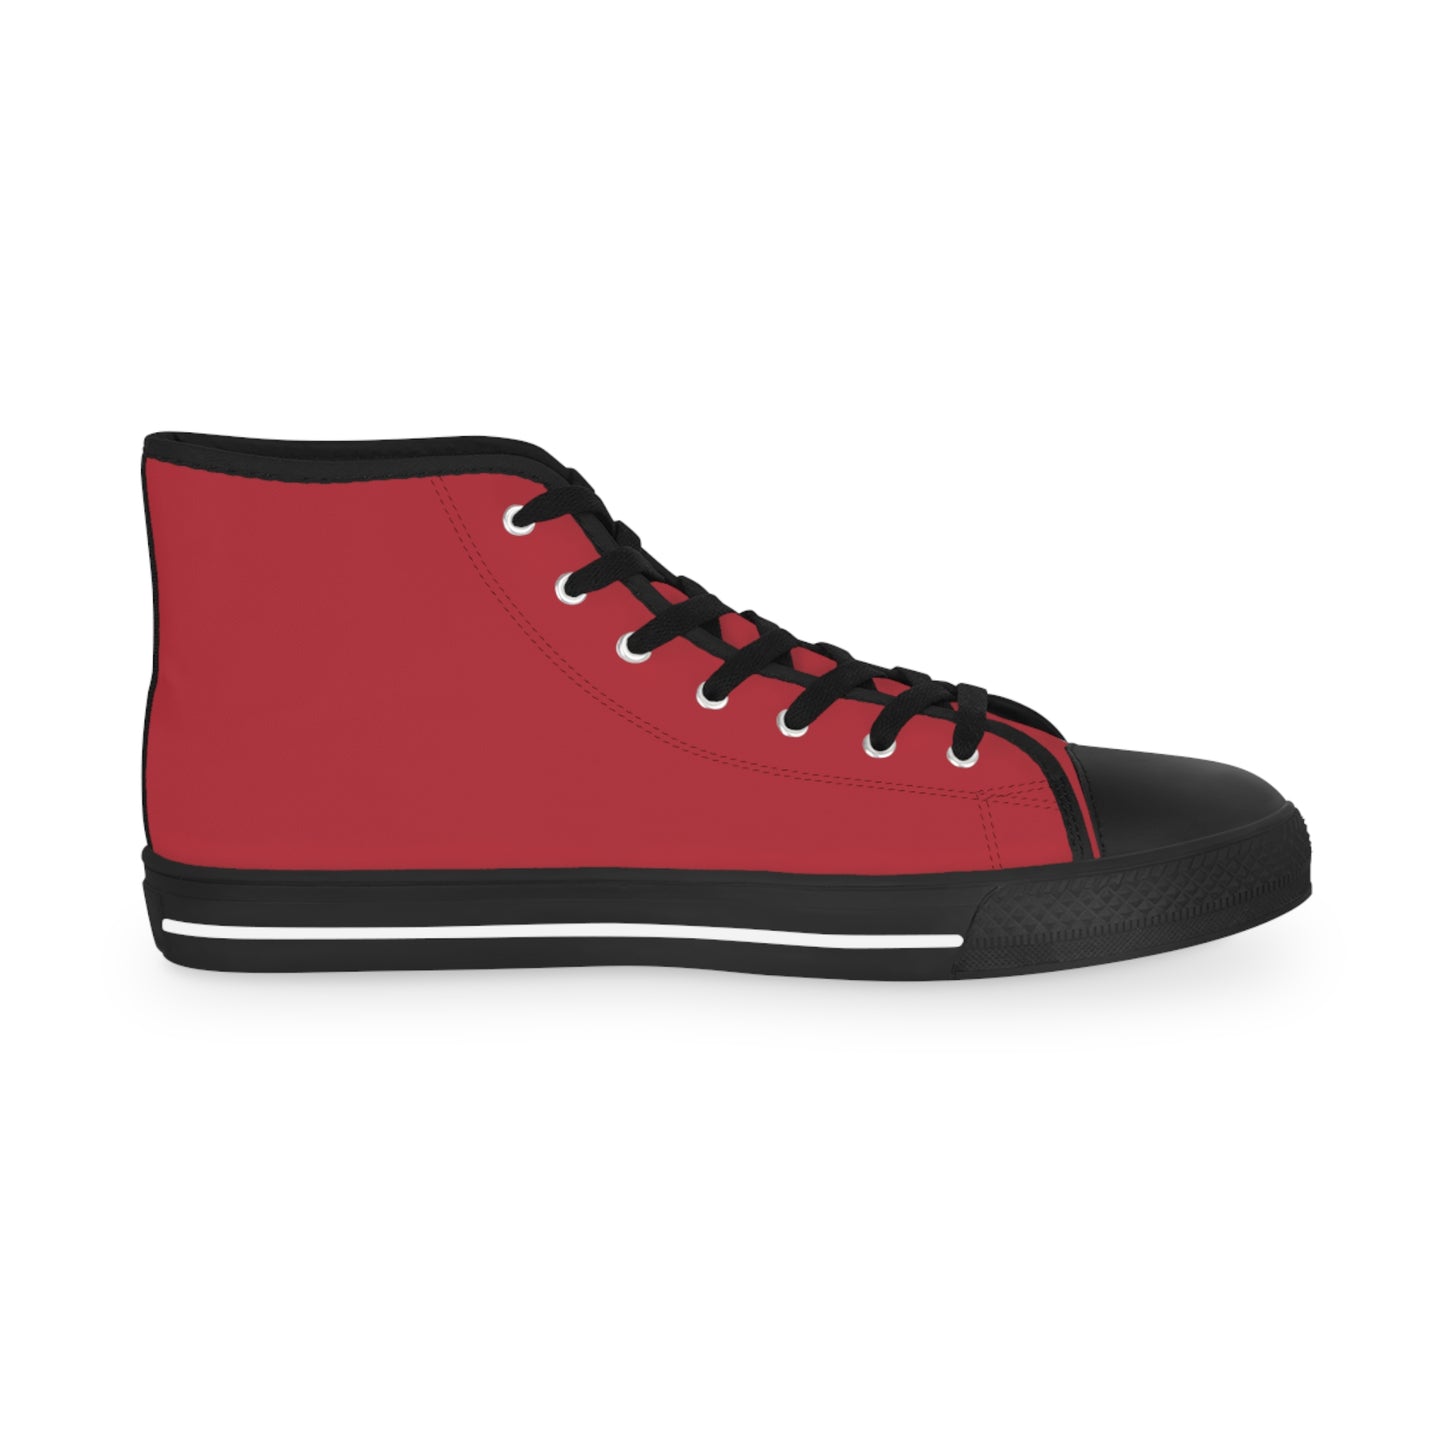 Men's High Top Sneakers - Red US 14 White sole